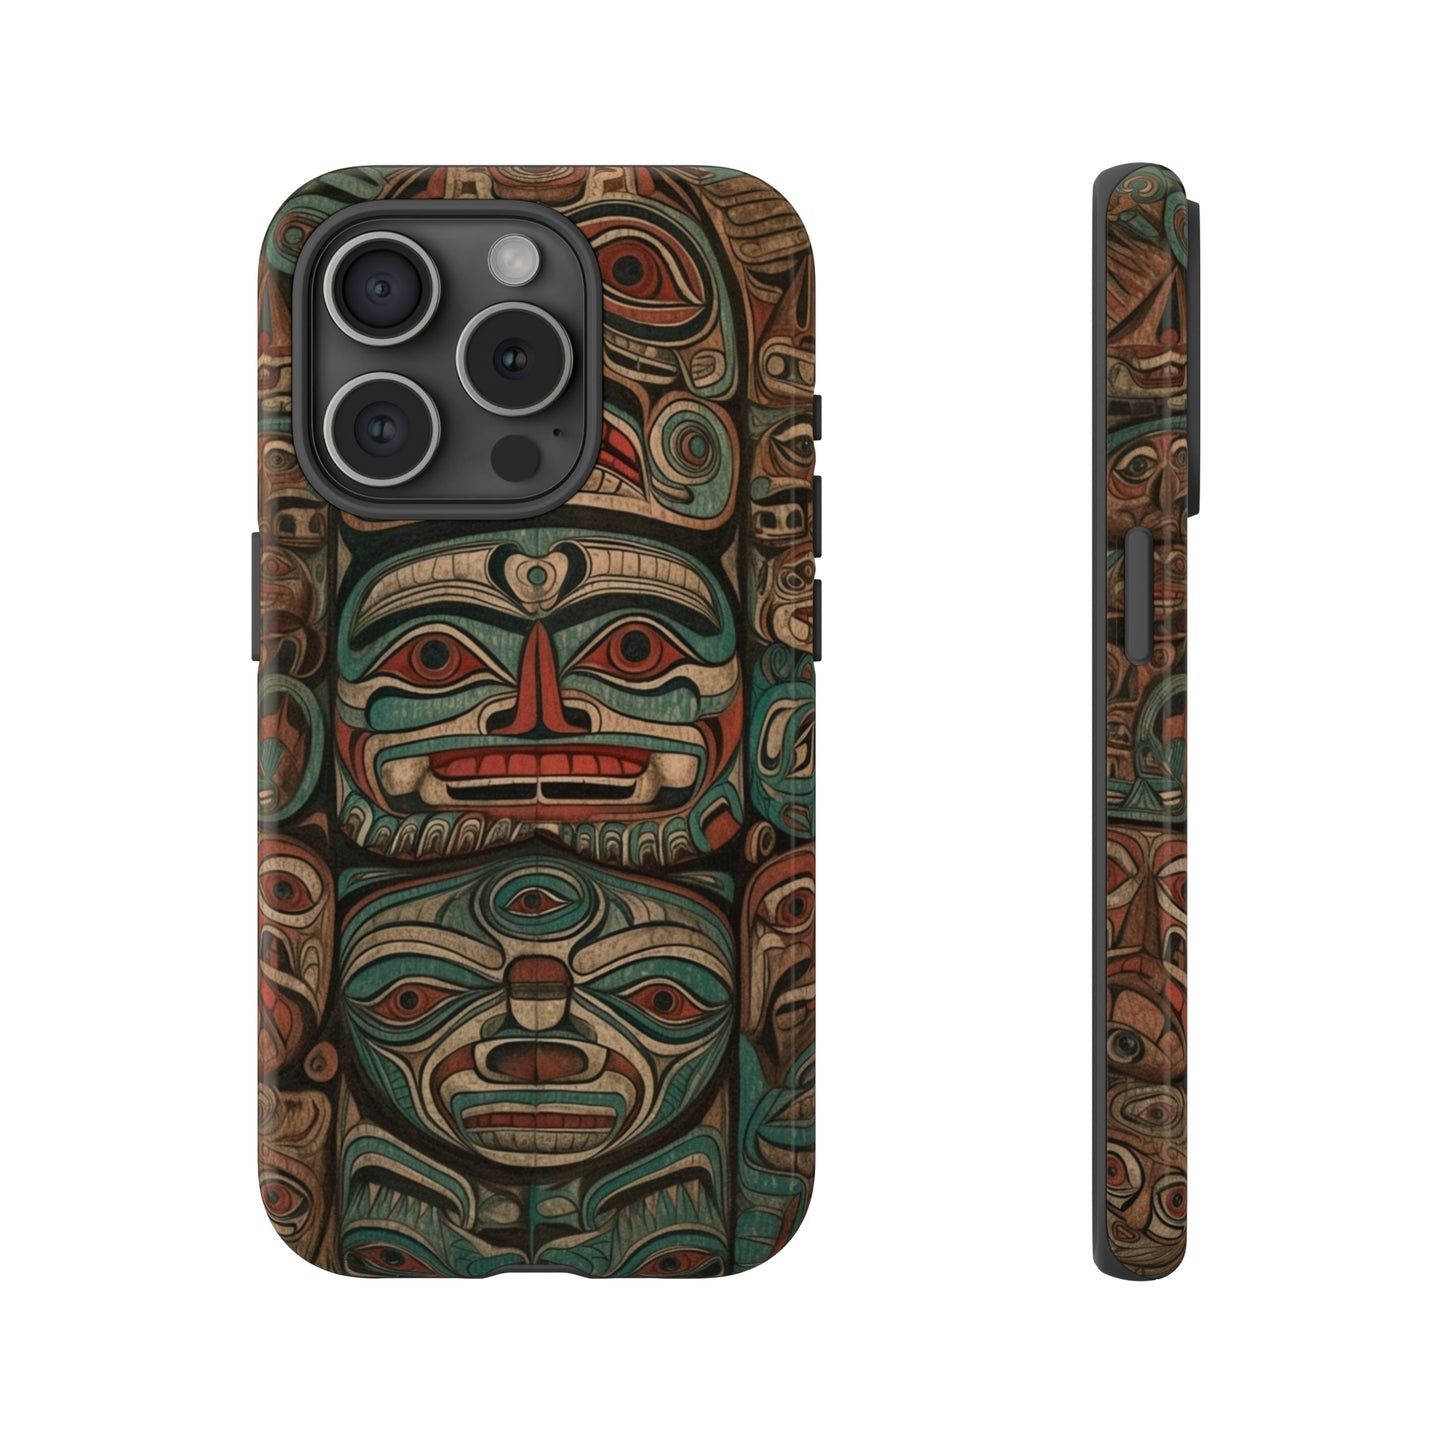 Northwest Tribal Totem Native American Case for iPhone